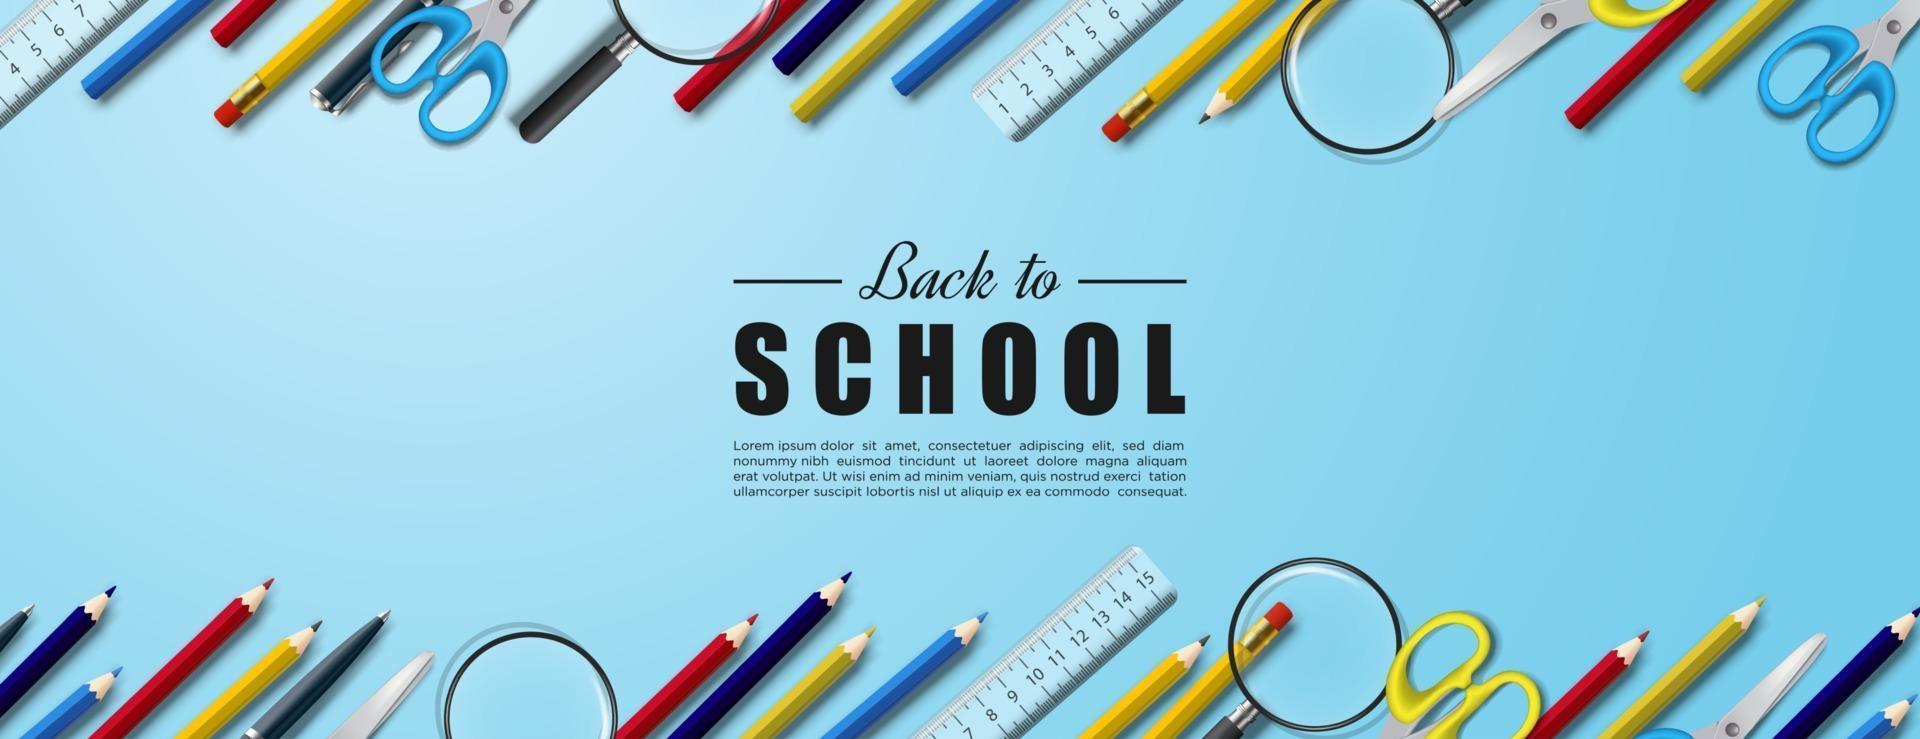 Back to school with school supplies lined up on rectangular background vector